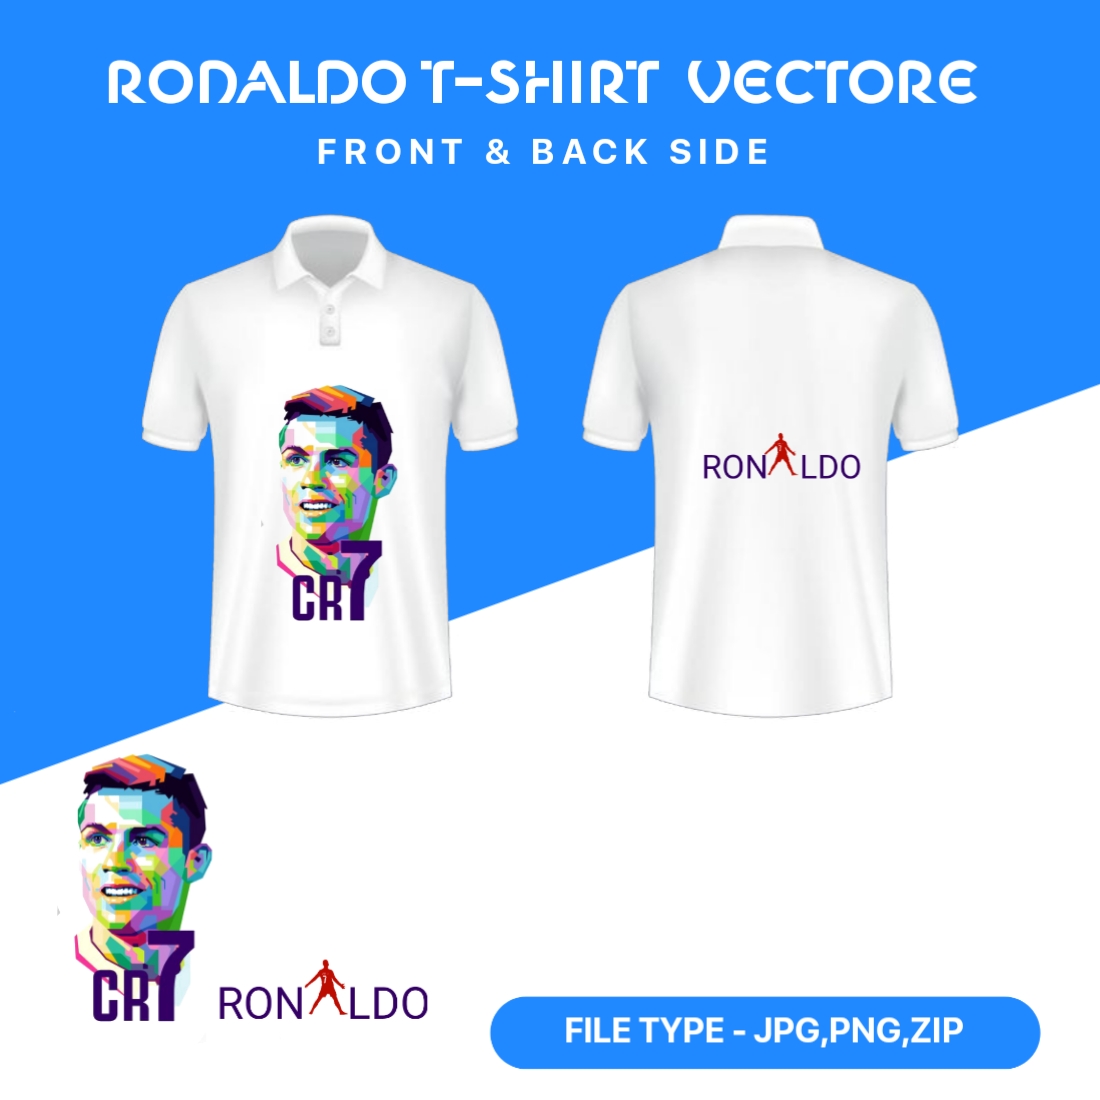 Cristiano Ronaldo t-shirt design front & back side preview image.